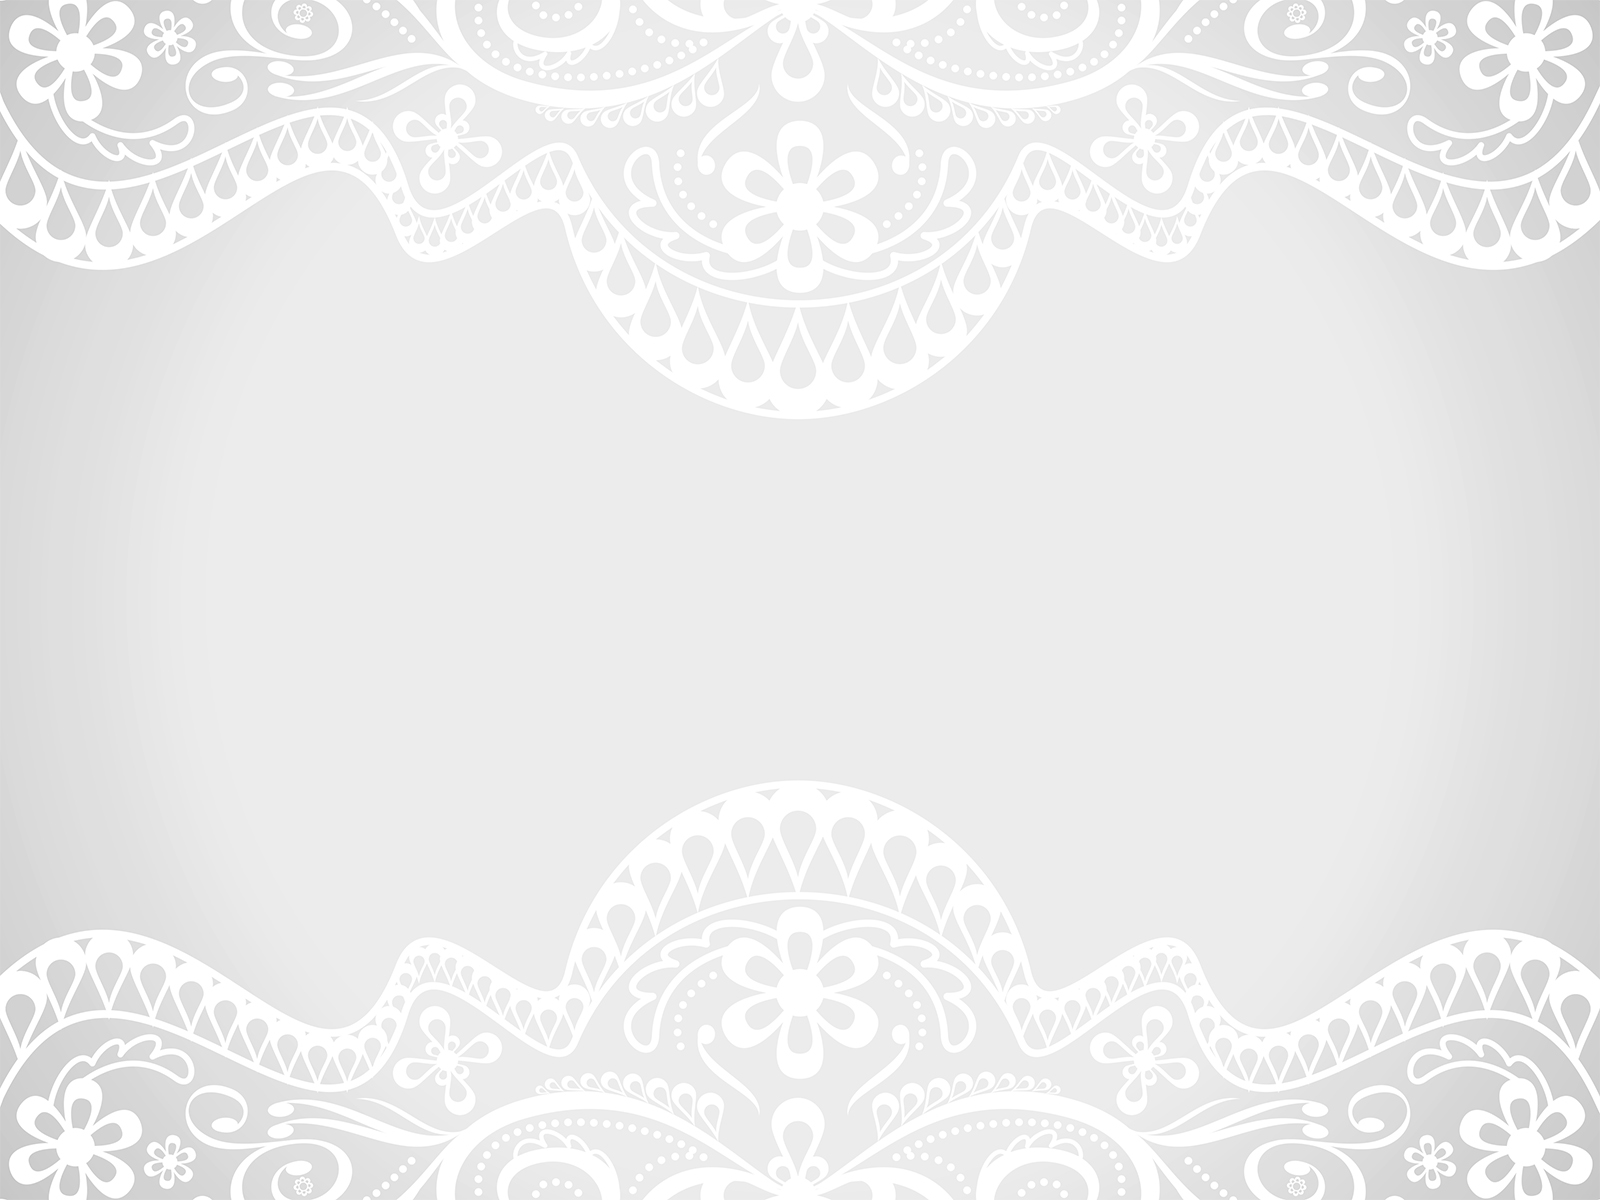 Floral Lace Ornament Ppt Backgrounds Template For Presentation   Ppt